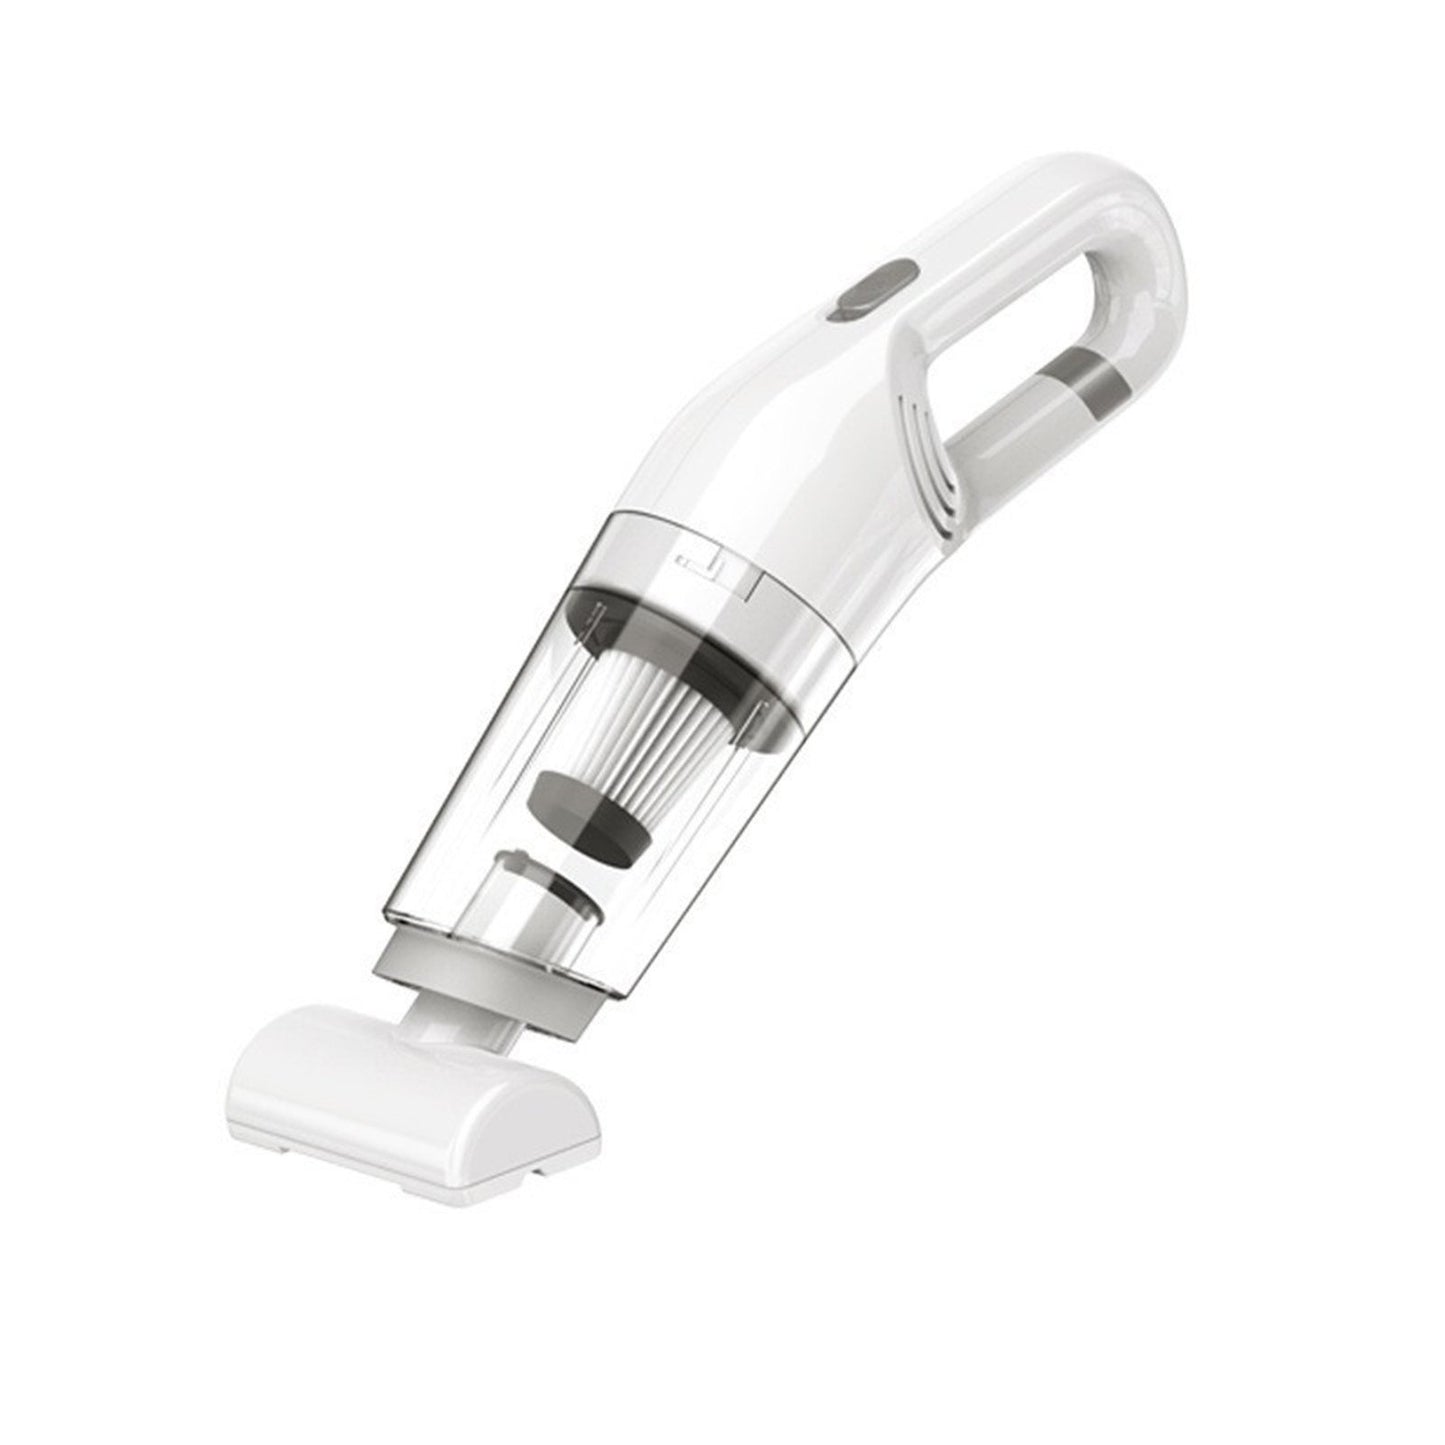 Handheld Cordless Vacuum Cleaner for easy cleaning7